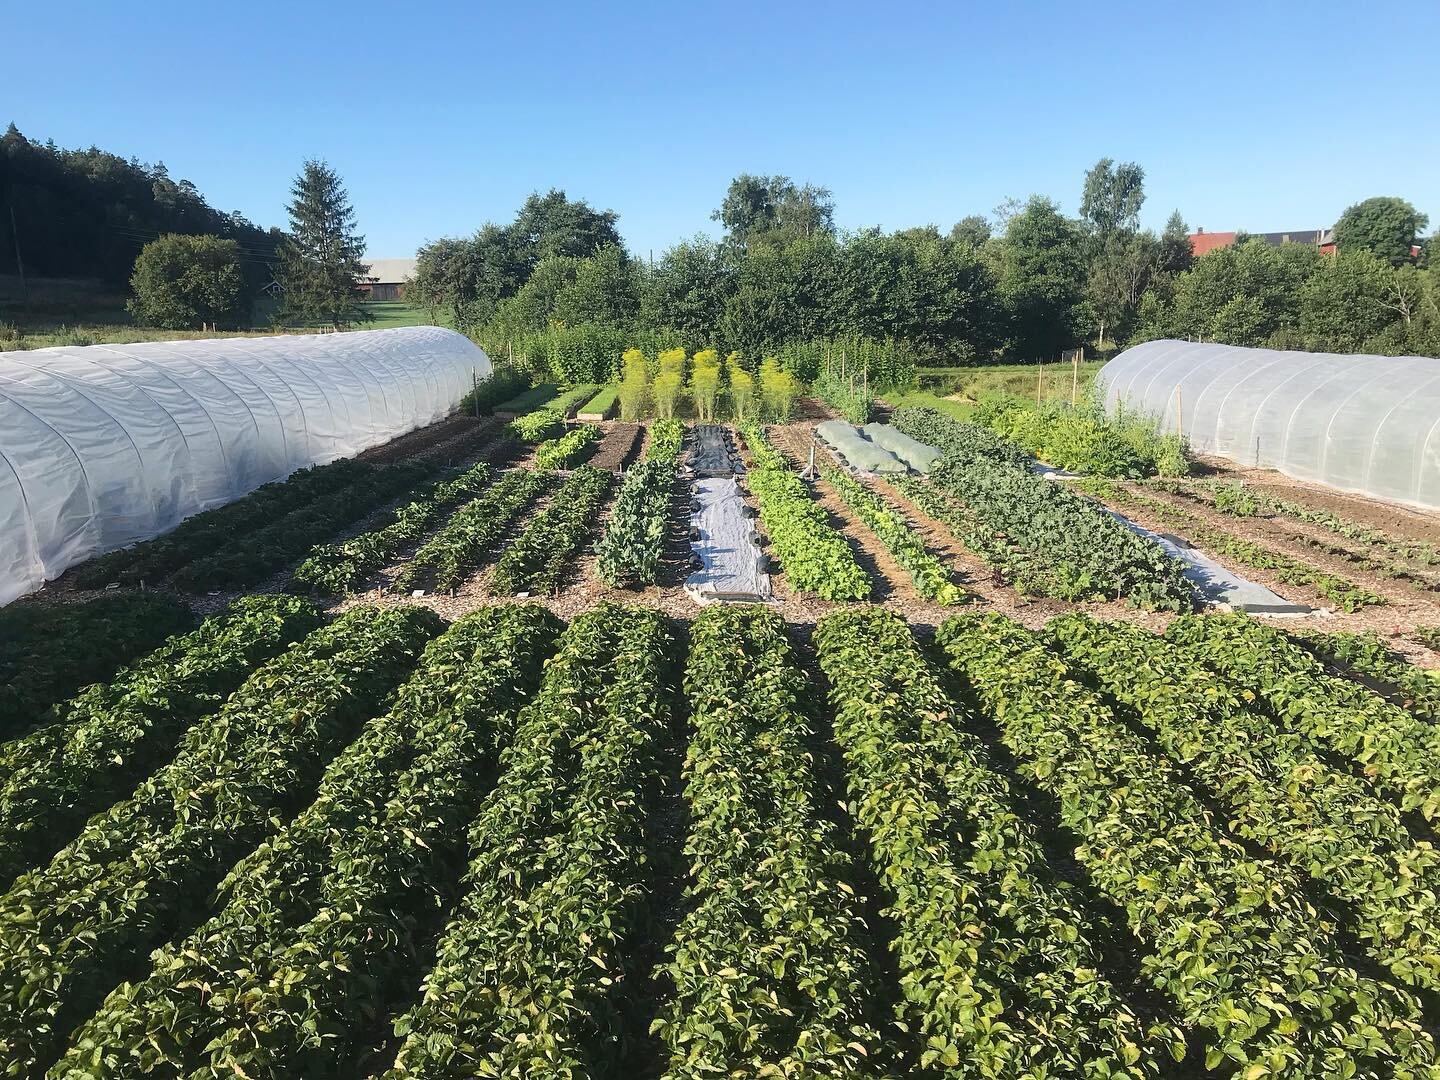 A view of our &ldquo;B&rdquo; plot of 92 beds, including 2 caterpillar tunnels. We also have an &ldquo;A&rdquo; plot with 30 flower beds, a &ldquo;C&rdquo; plot of 46 vegetable beds, a polytunnel and a small plot of perennial flowers.  All of our bed